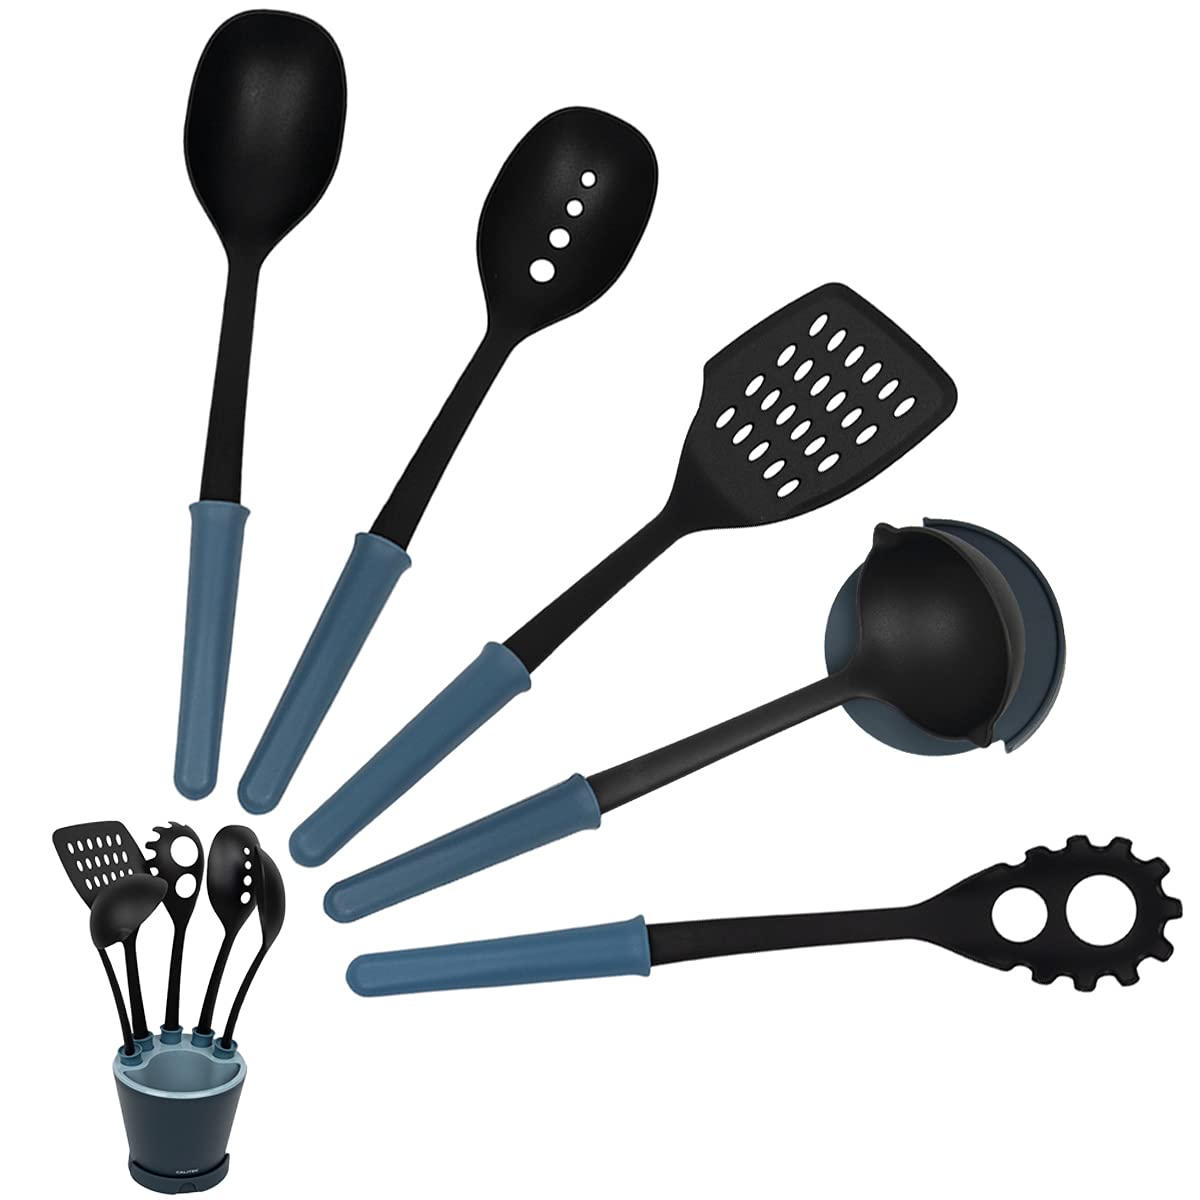  Best utensils to use with stainless steel cookware